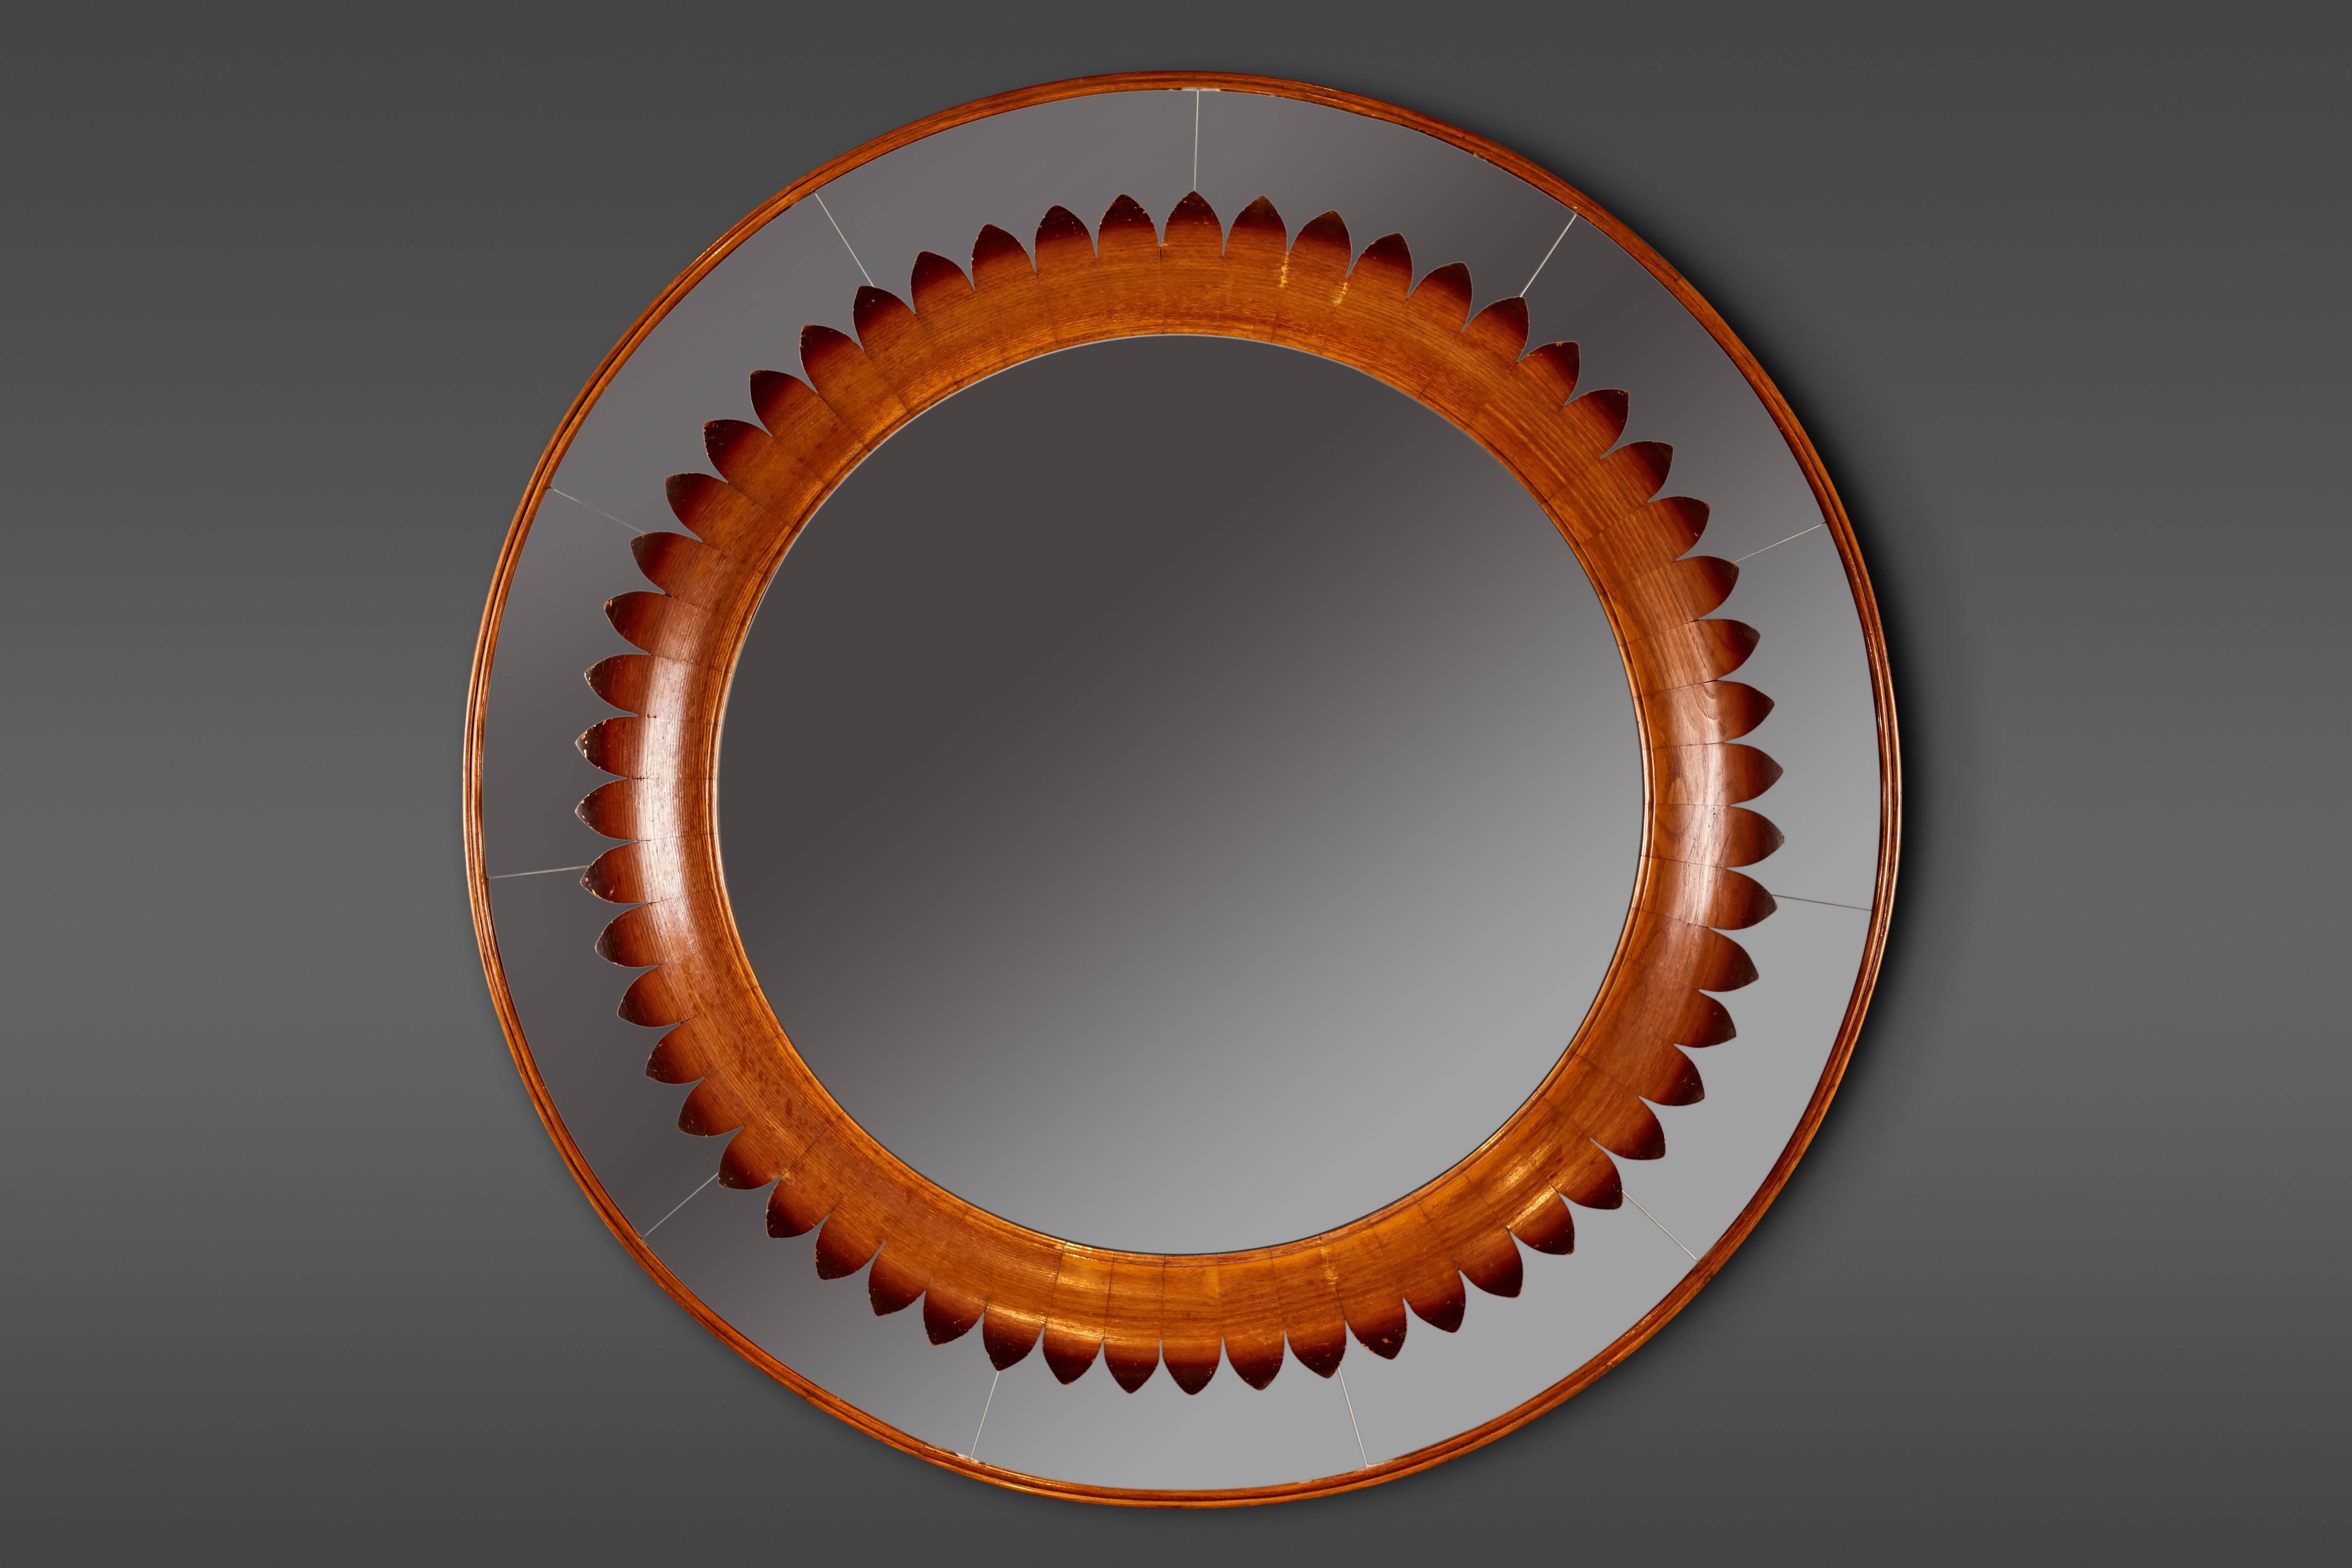 An exquisitely carved round oak mirror, double framed with a surround of segmented mirrors and wood banding.